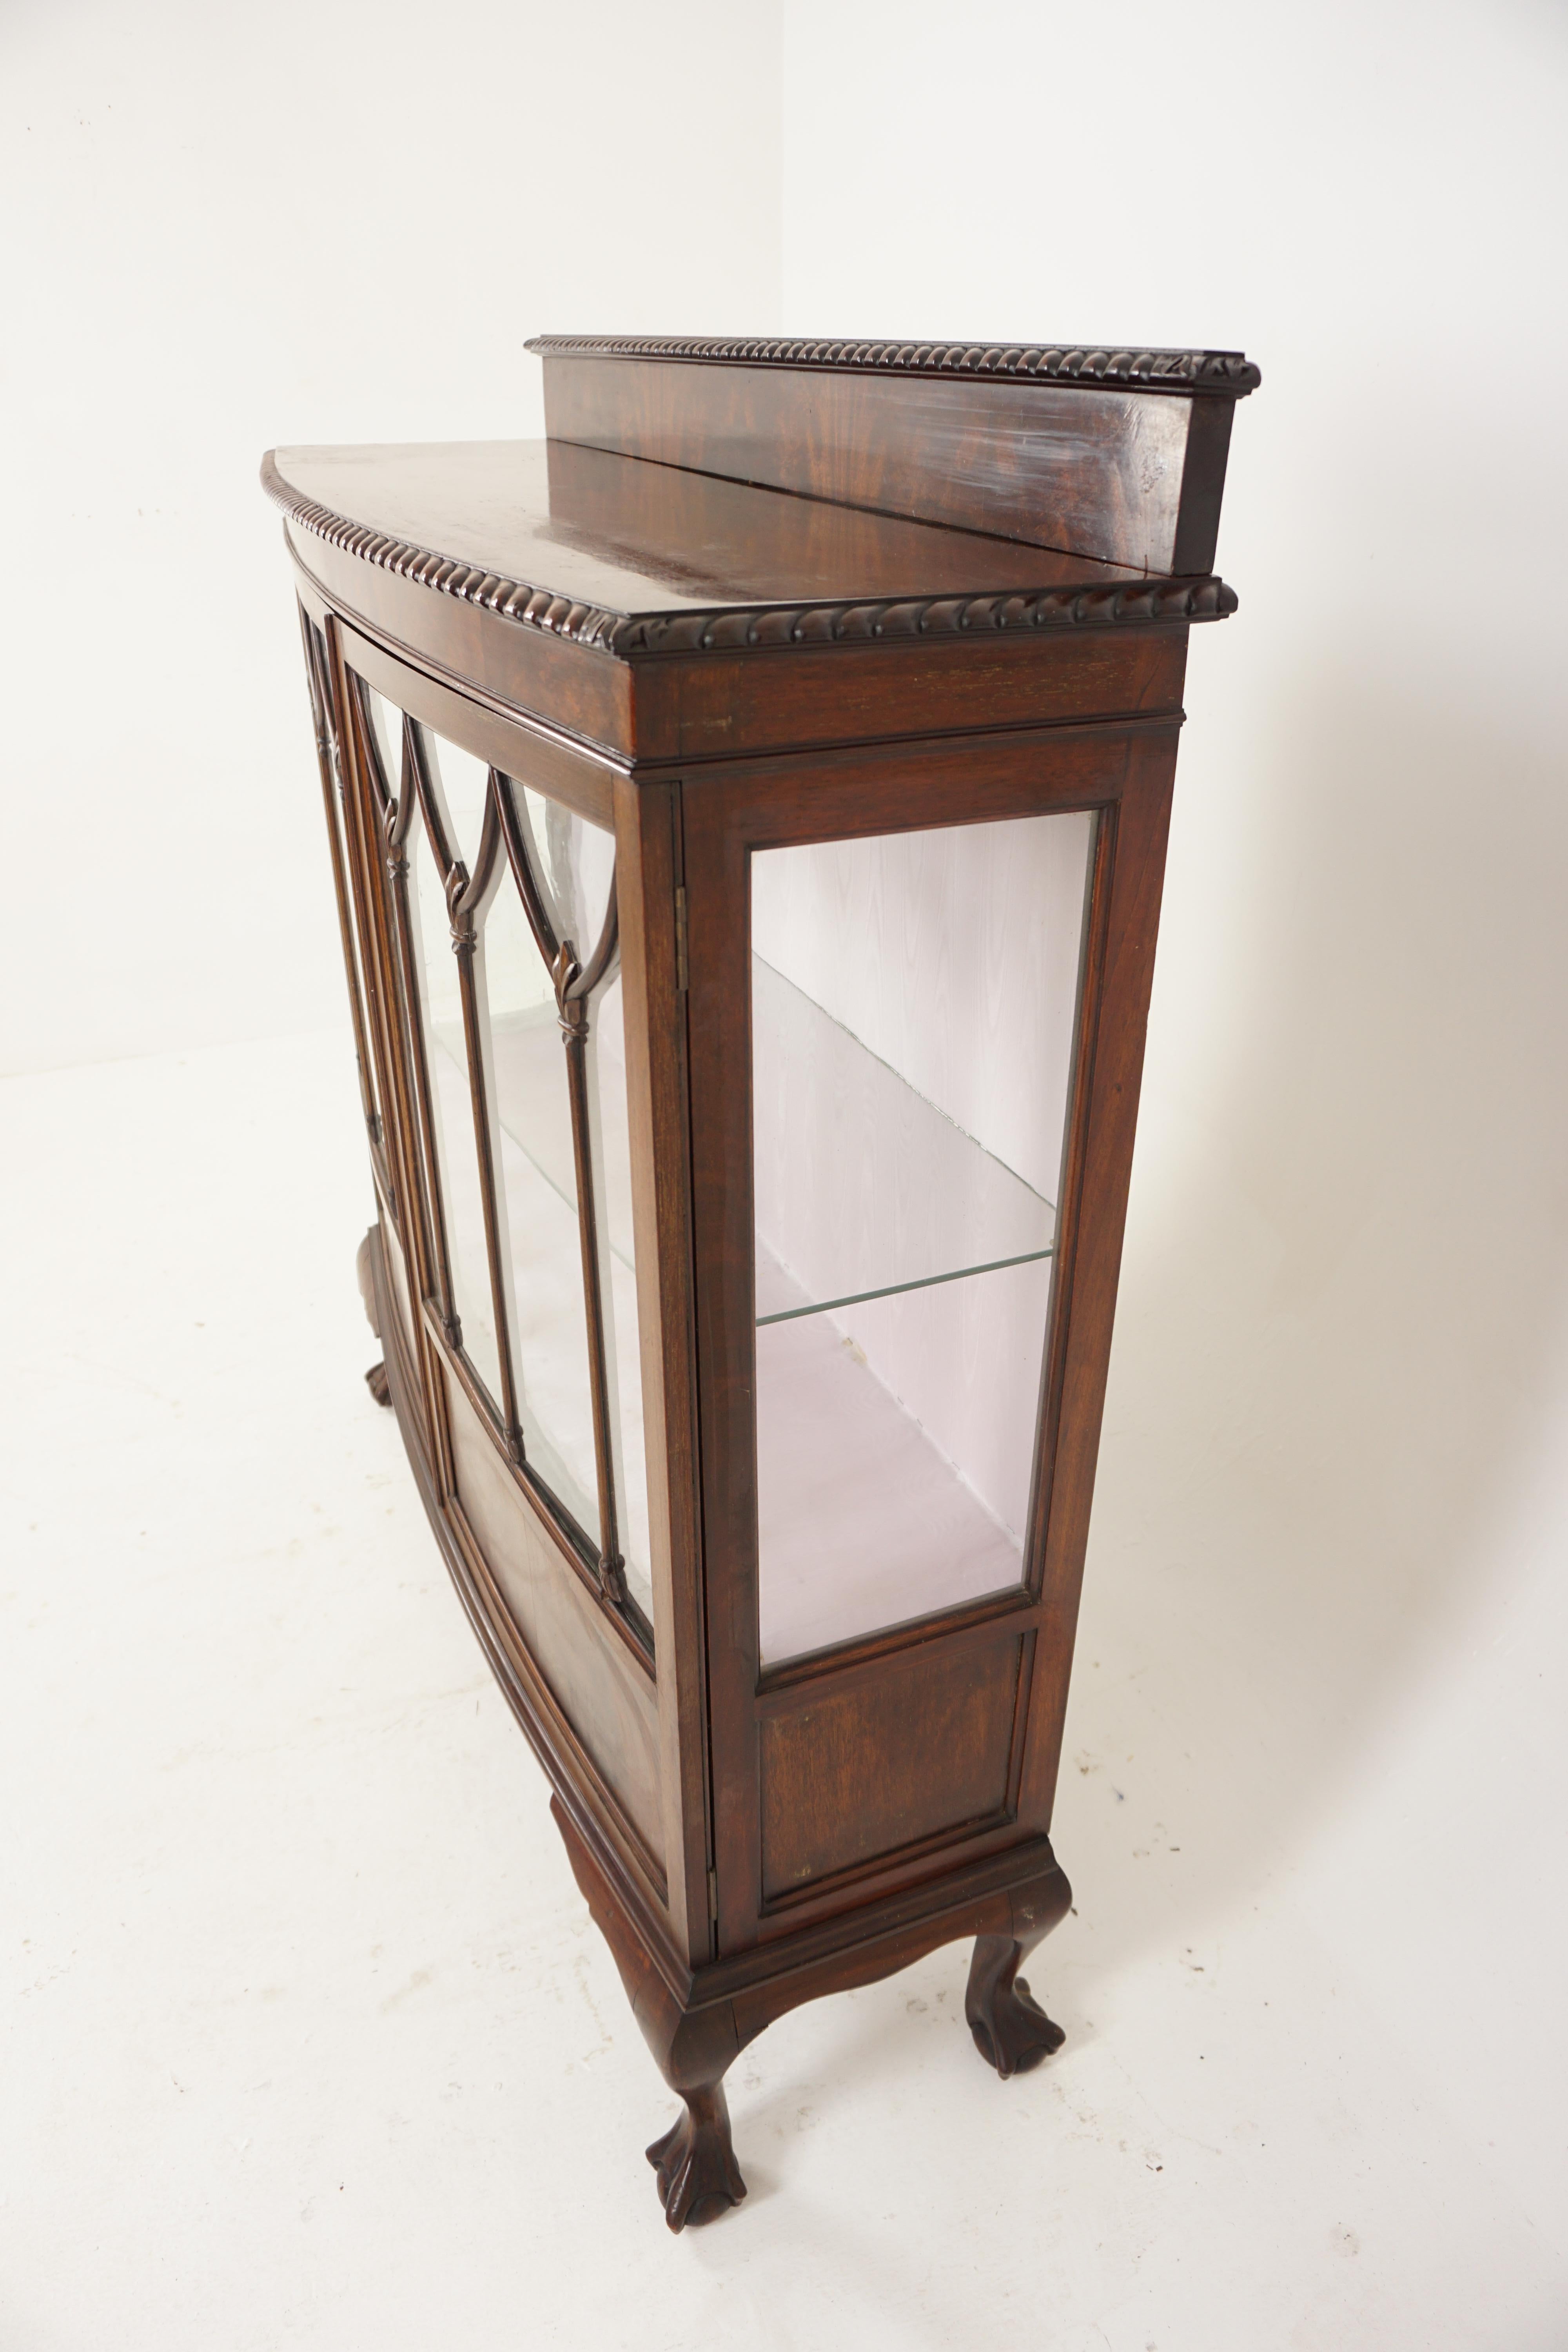 Early 20th Century Large Ant, Walnut Bow Front Display Cabinet, China Cabinet, Scotland 1910, H807